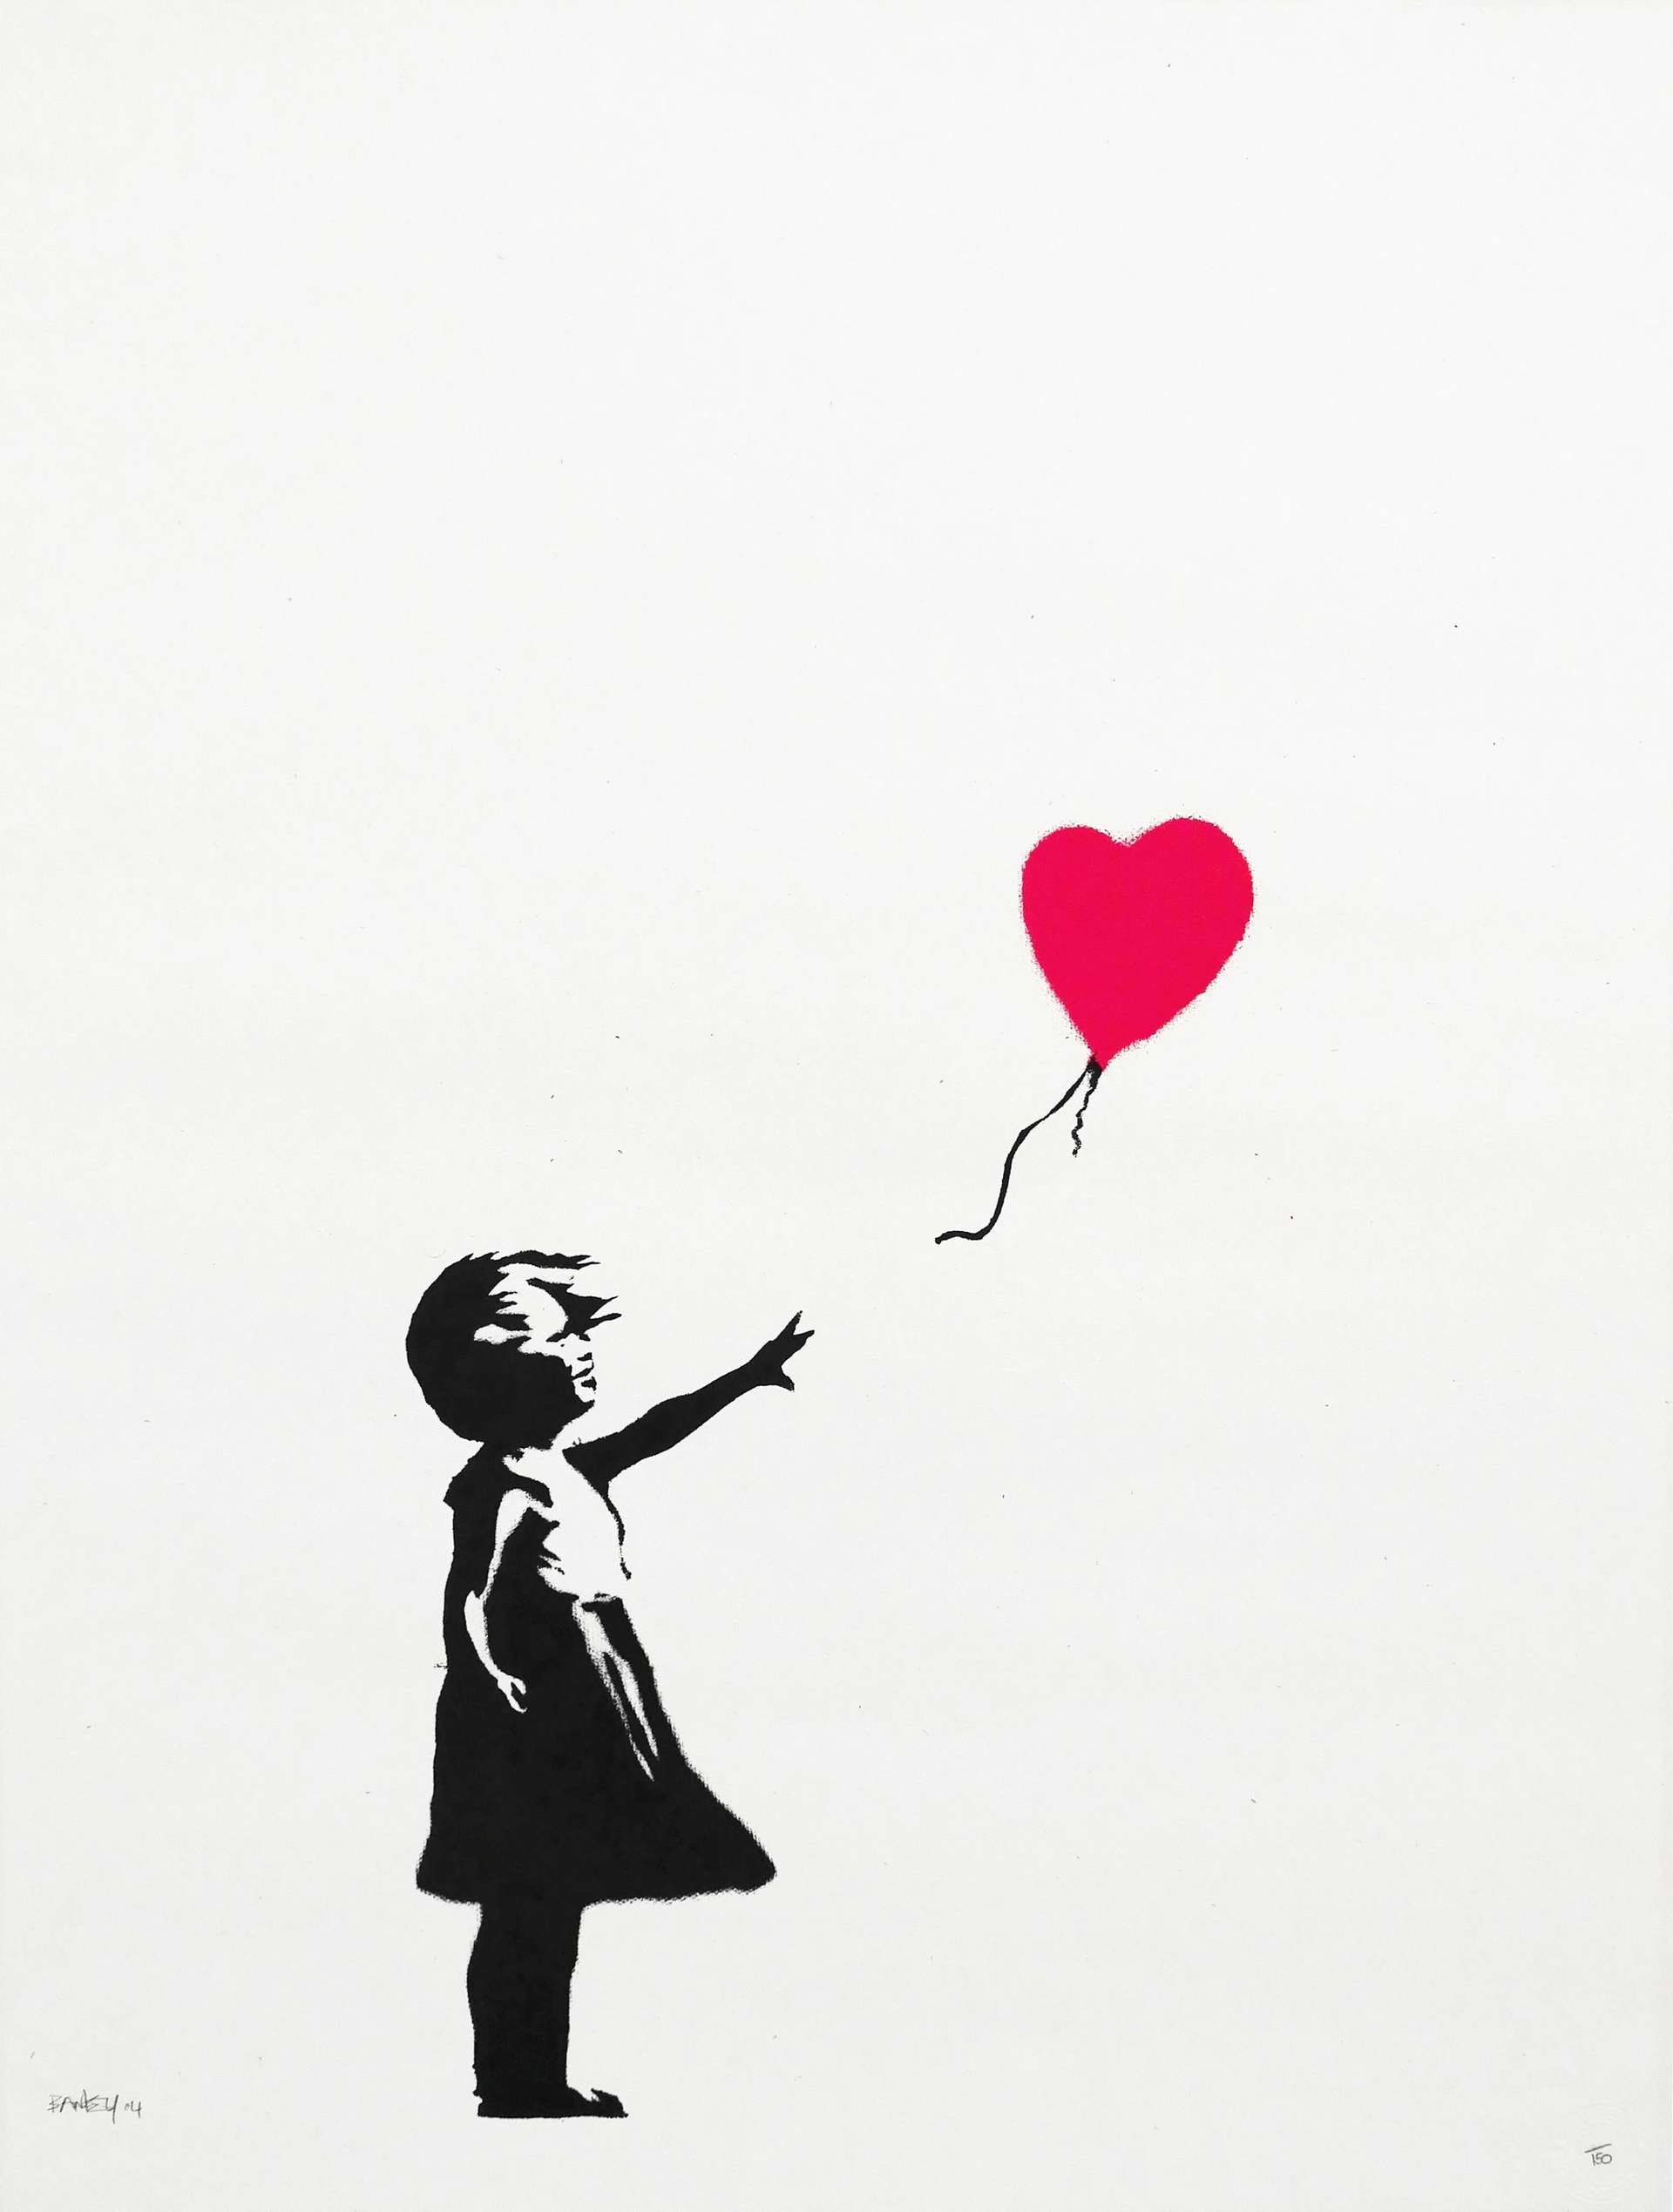 Stencilled black image of a young girl holding a red heart balloon